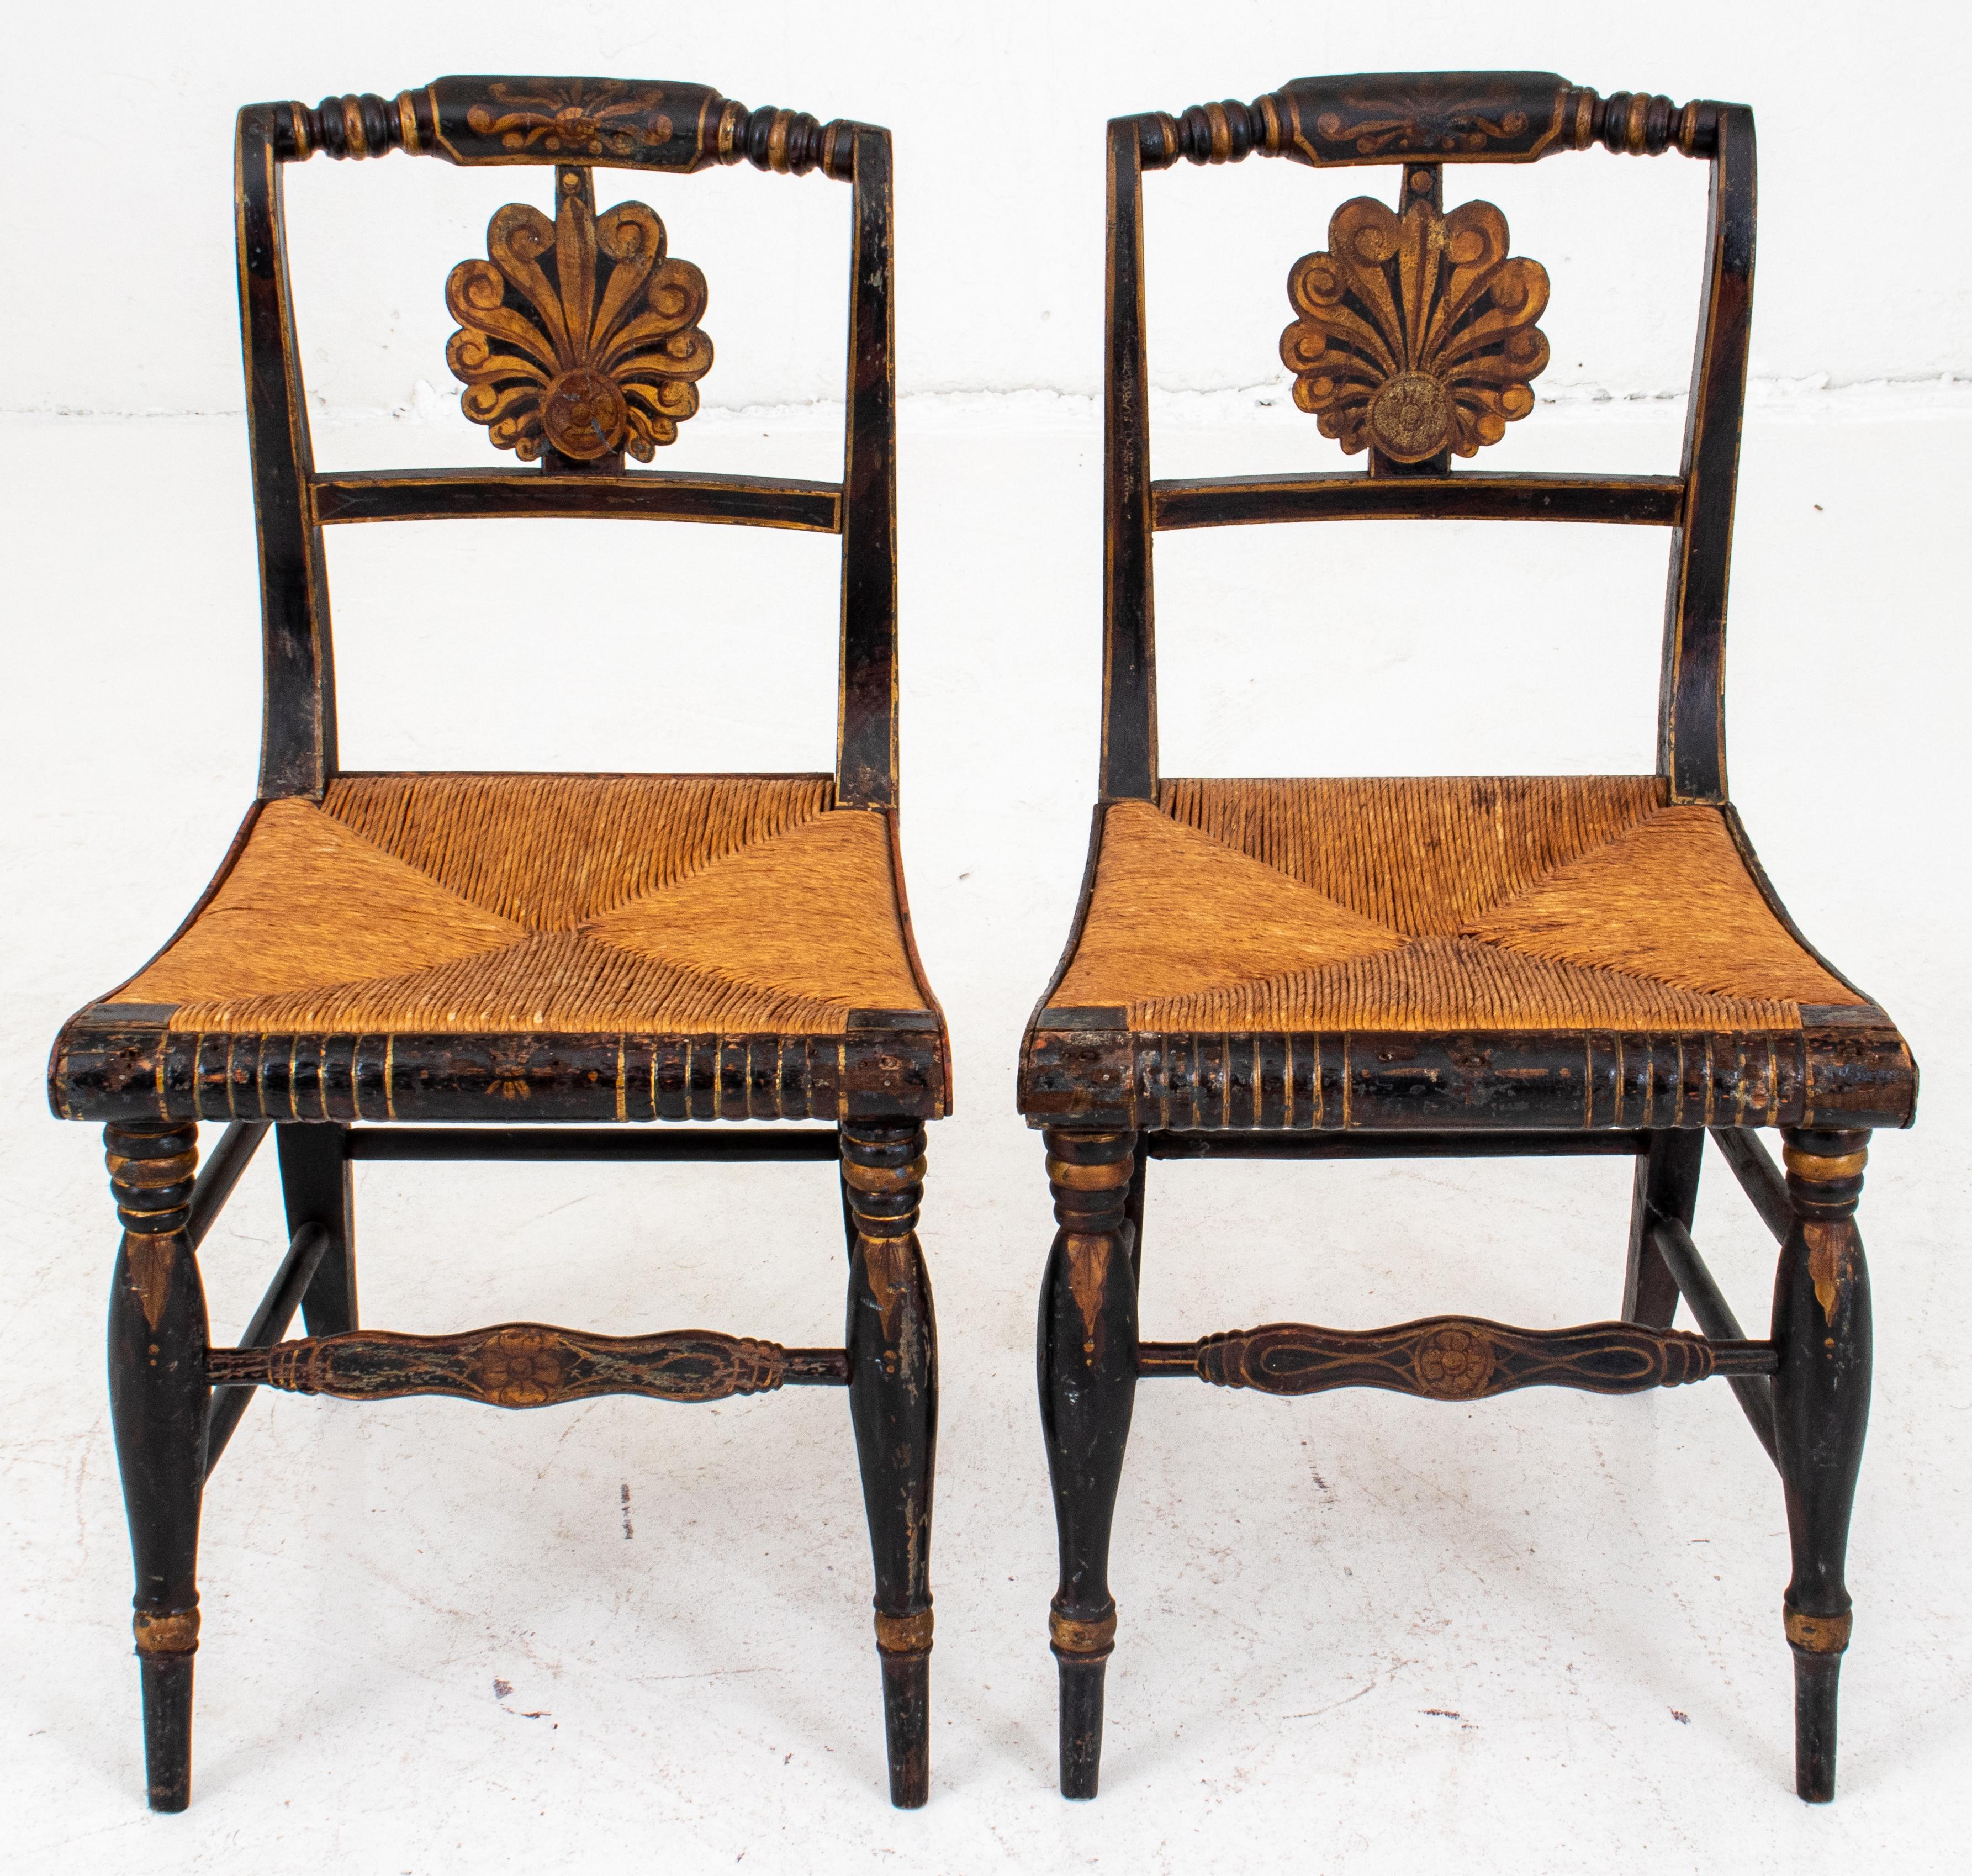 Pair of American Empire ebonized and paint decorated side chairs with rush seats, with turned seat backs and legs. 32.5